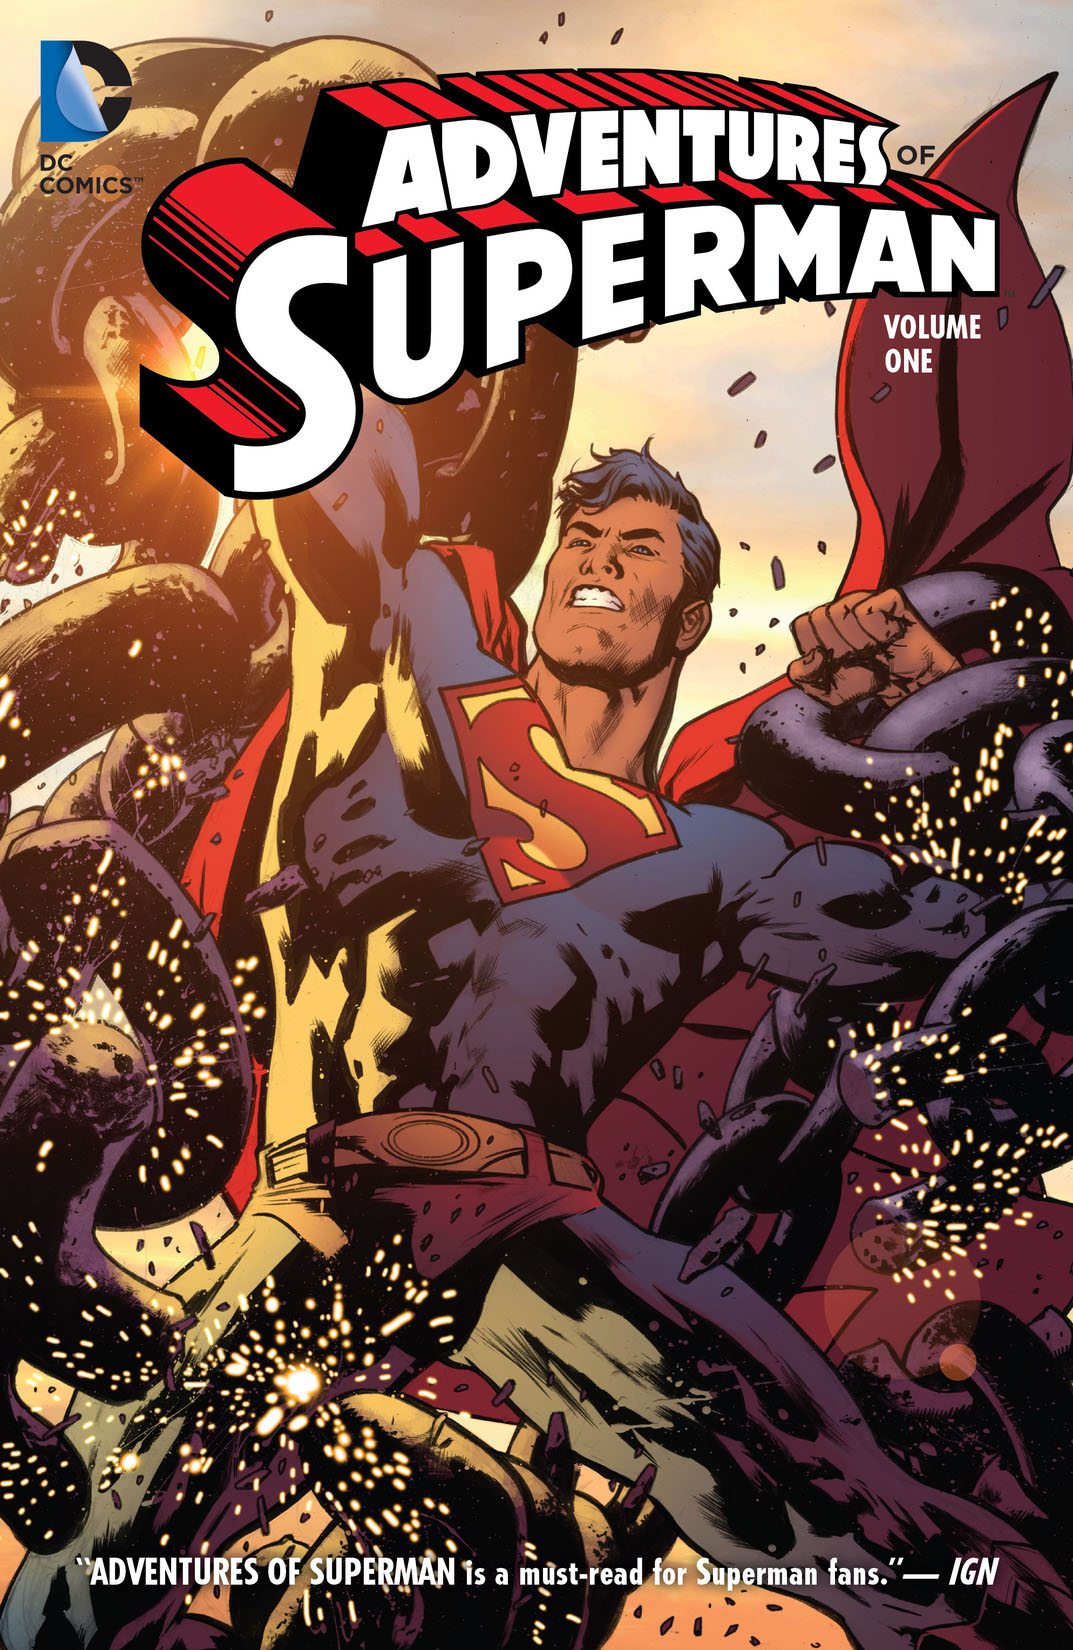 Adventures of Superman Vol. 1 preview images